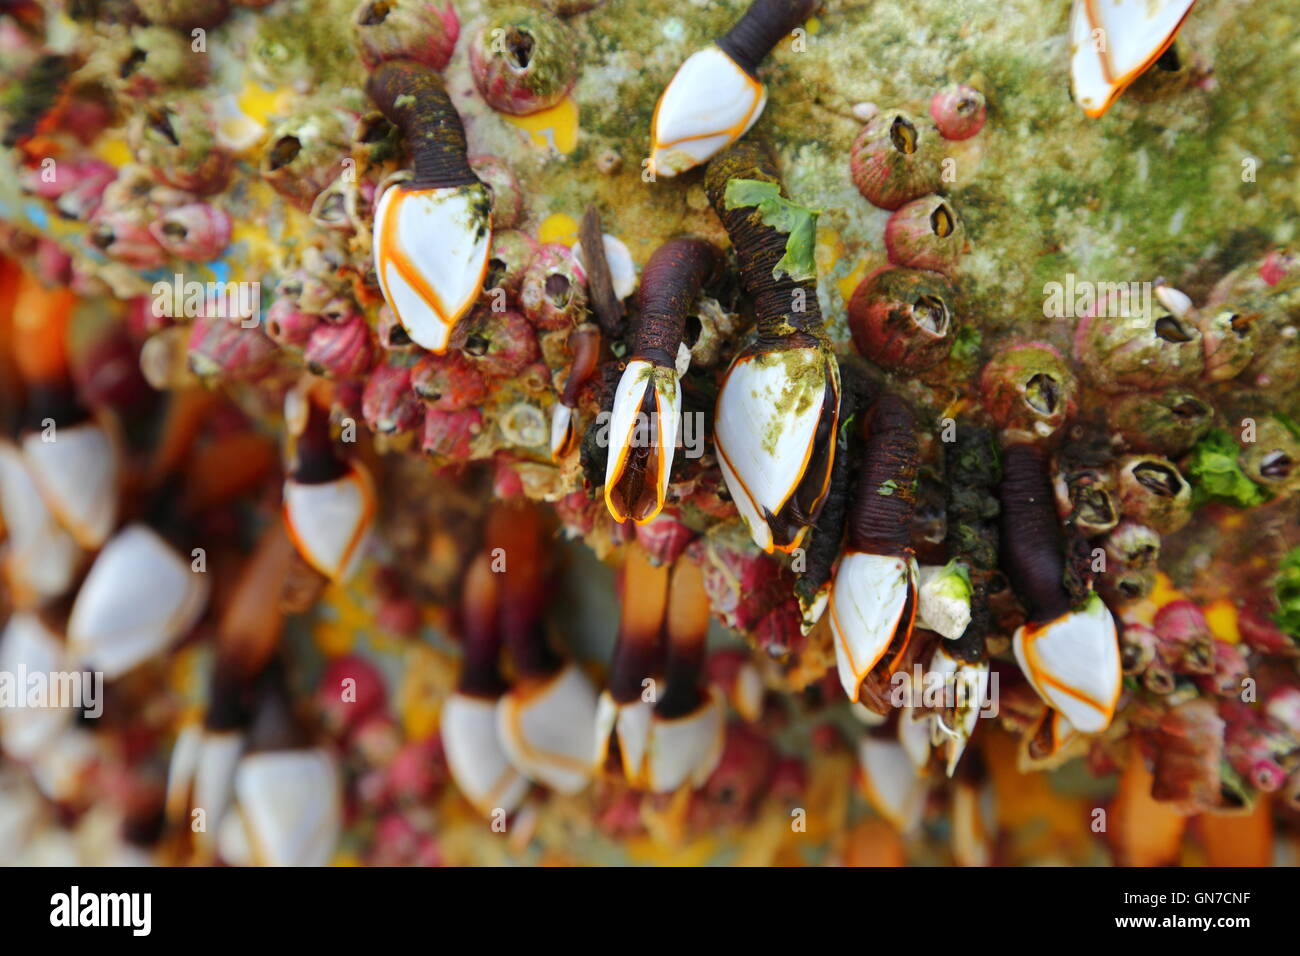 Goose barnacles (order Pedunculata), also called stalked barnacles or gooseneck barnacles, on a washed-up bouy. Stock Photo